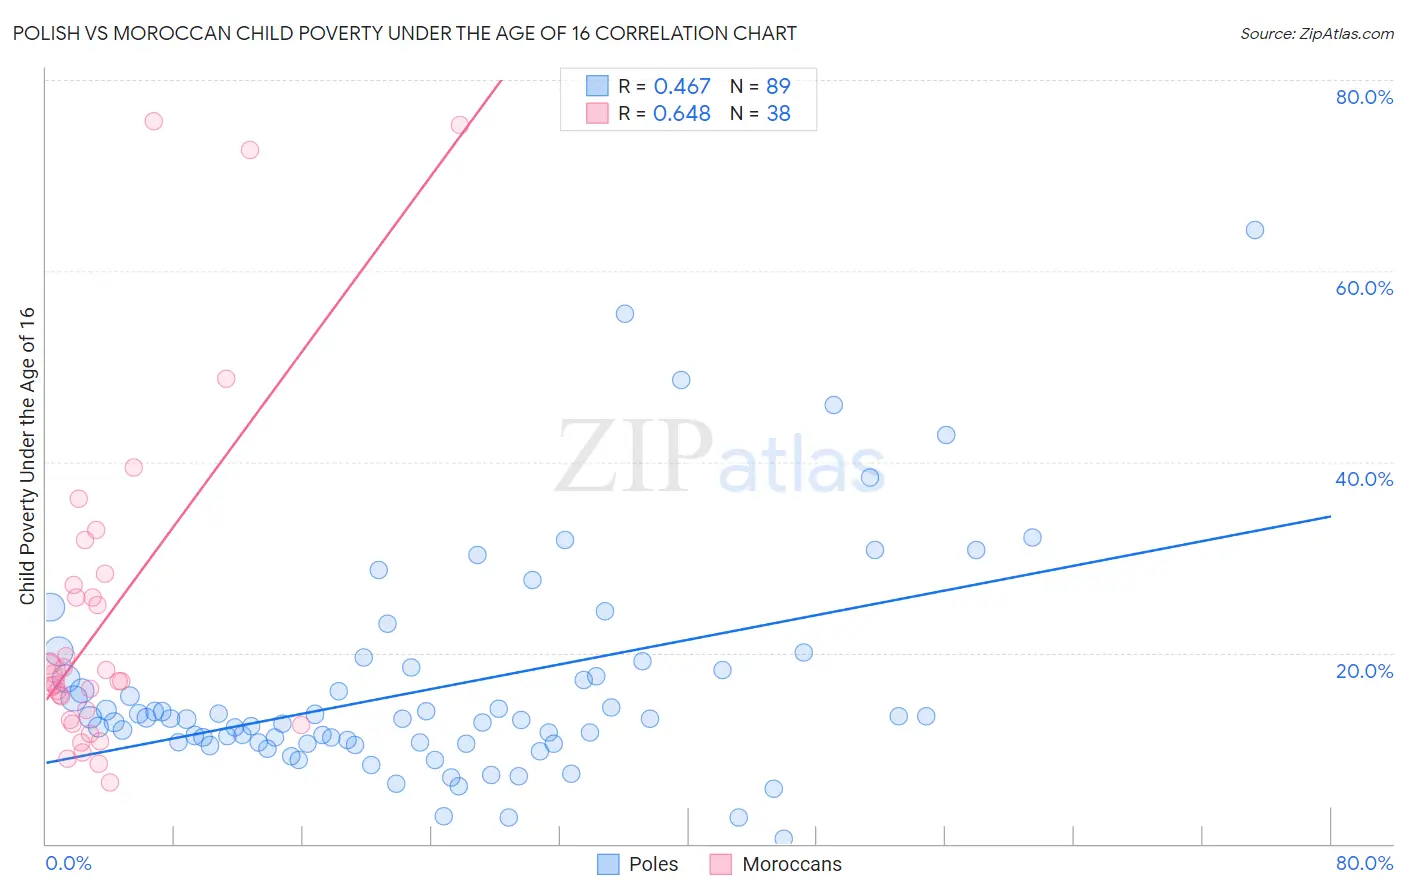 Polish vs Moroccan Child Poverty Under the Age of 16